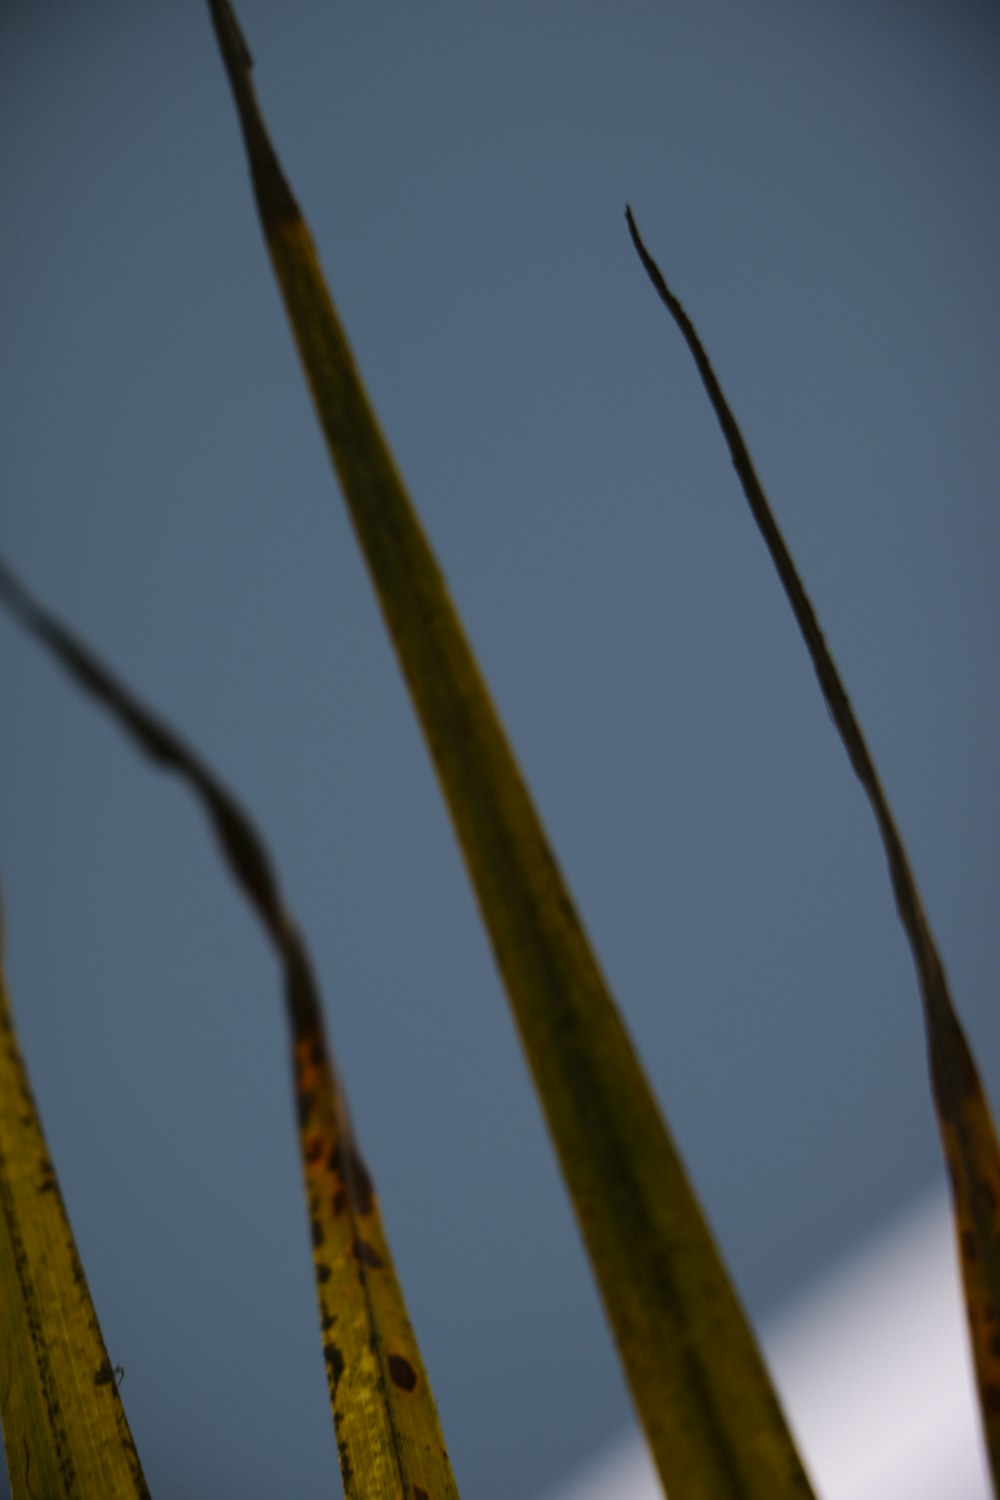 a close up of a plant with long thin stems